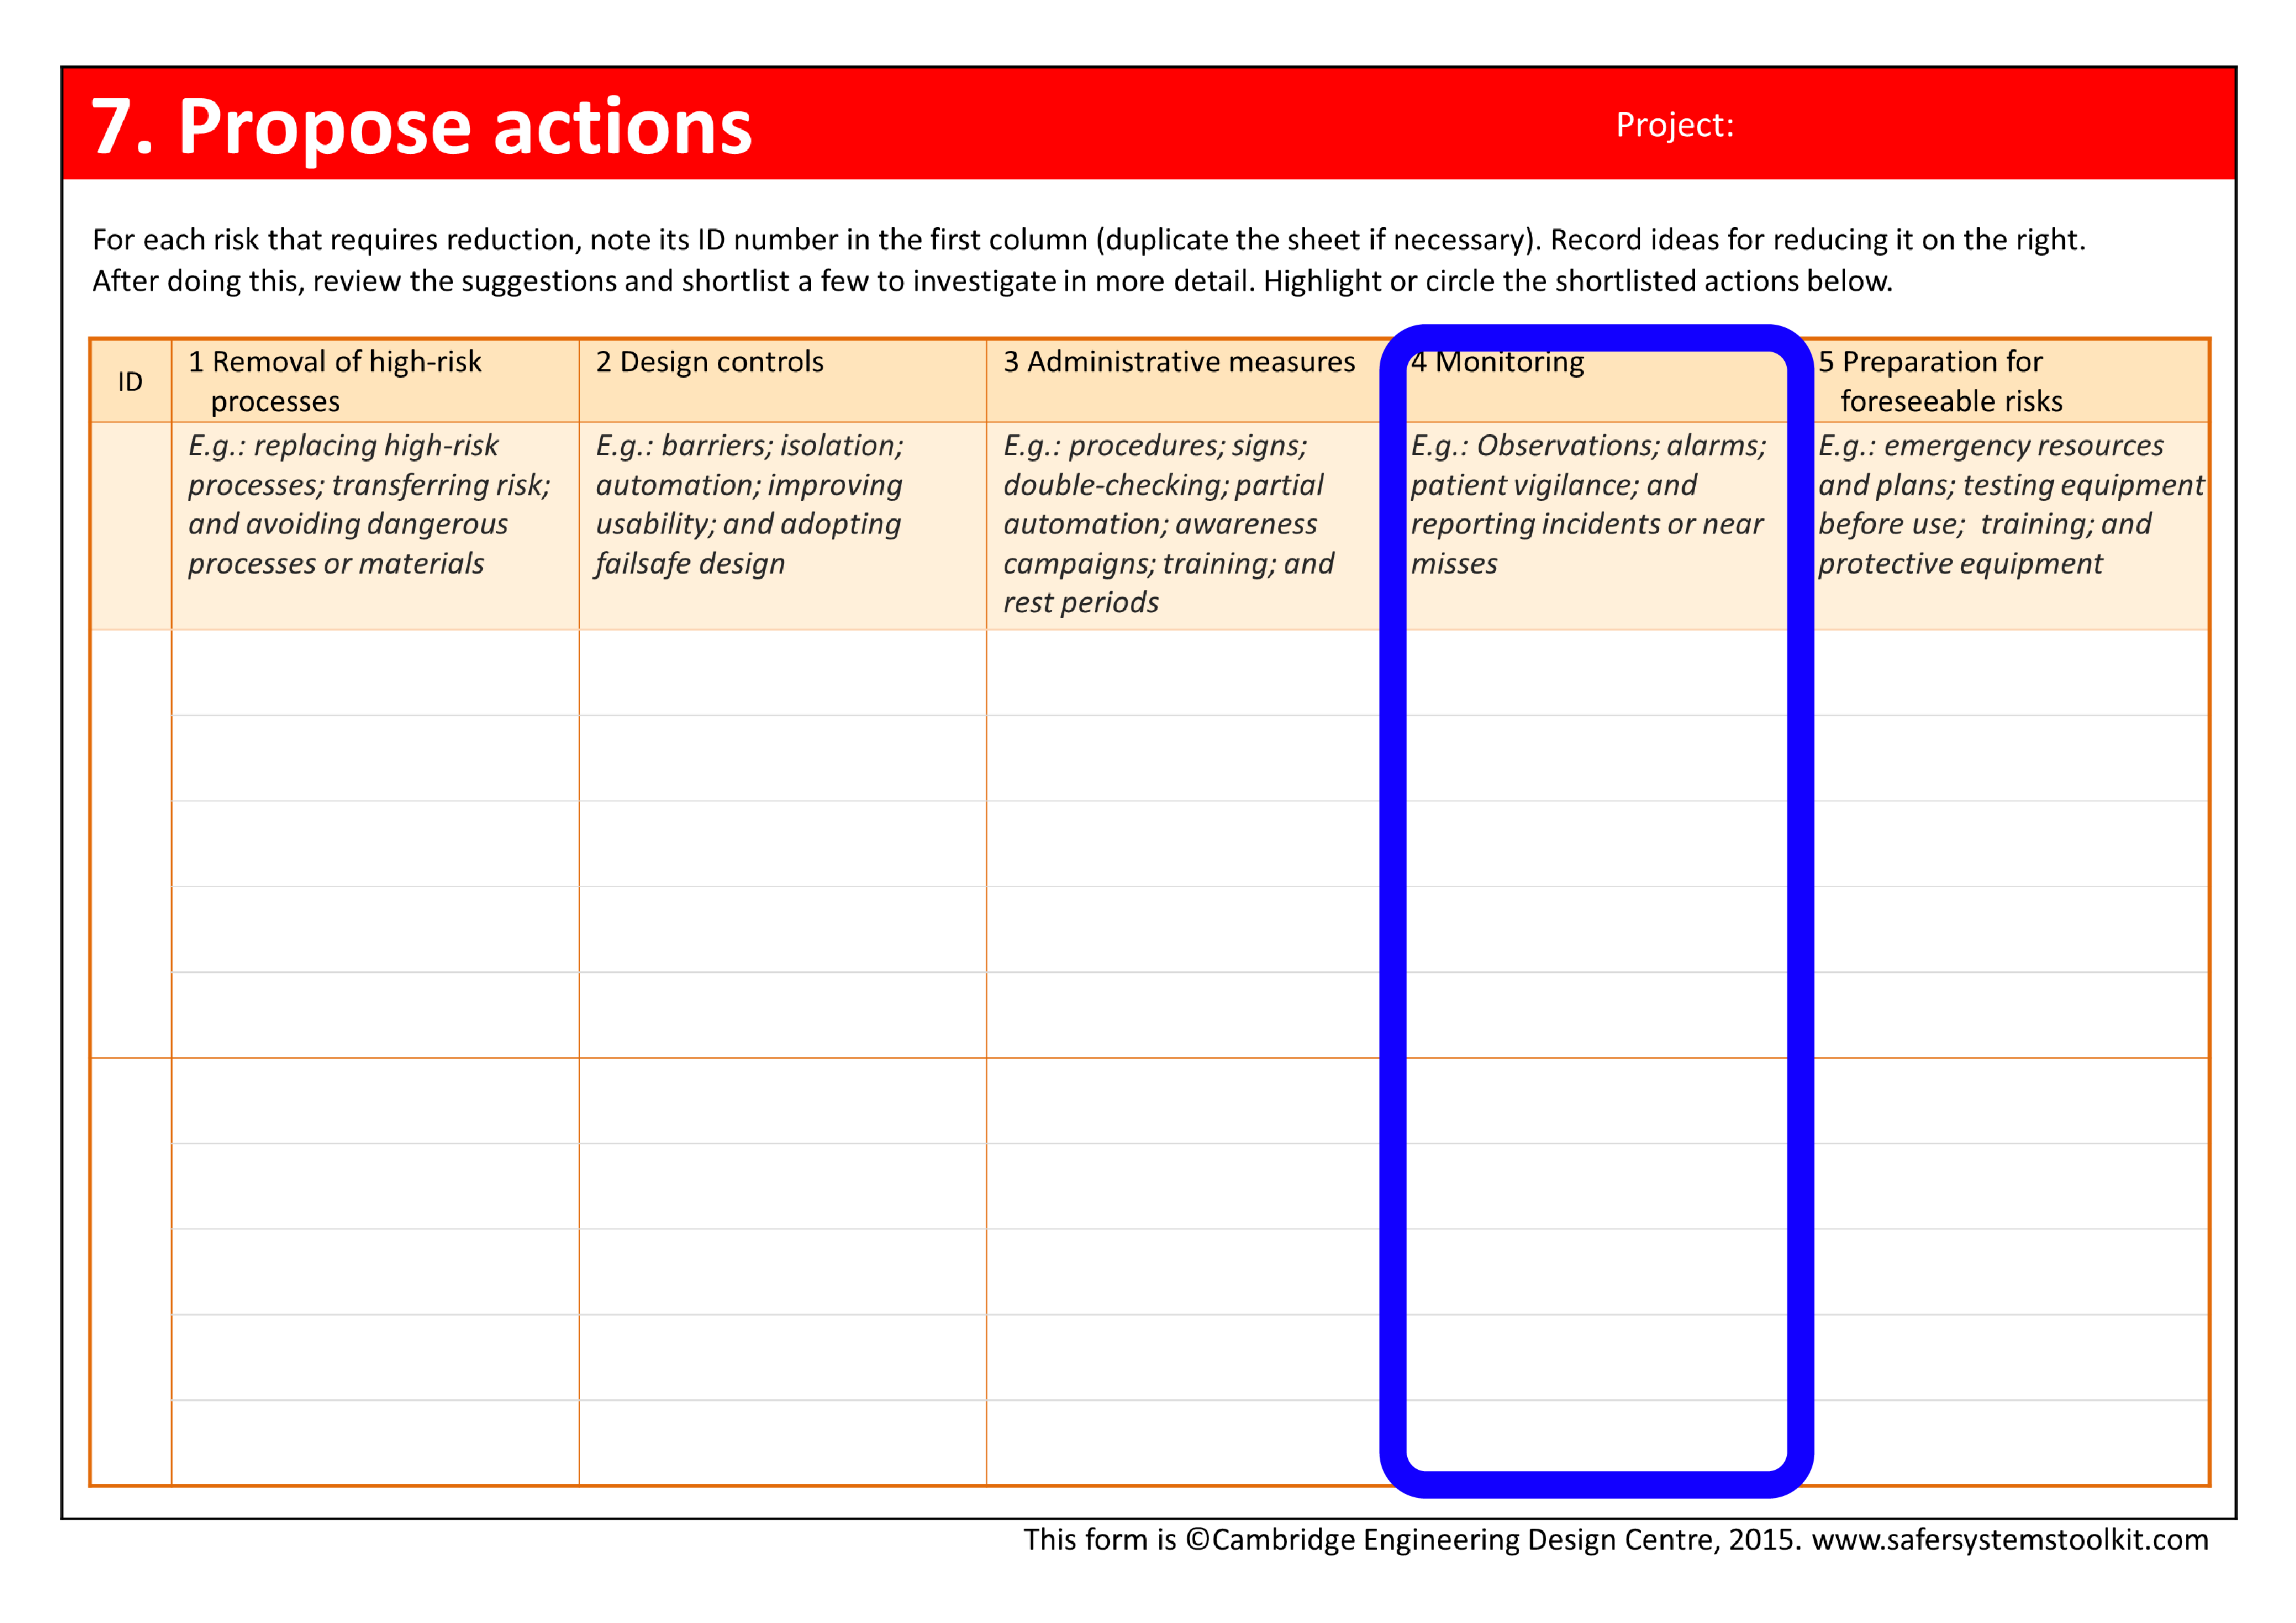 Screenshot of the Propose actions page of the assessment form